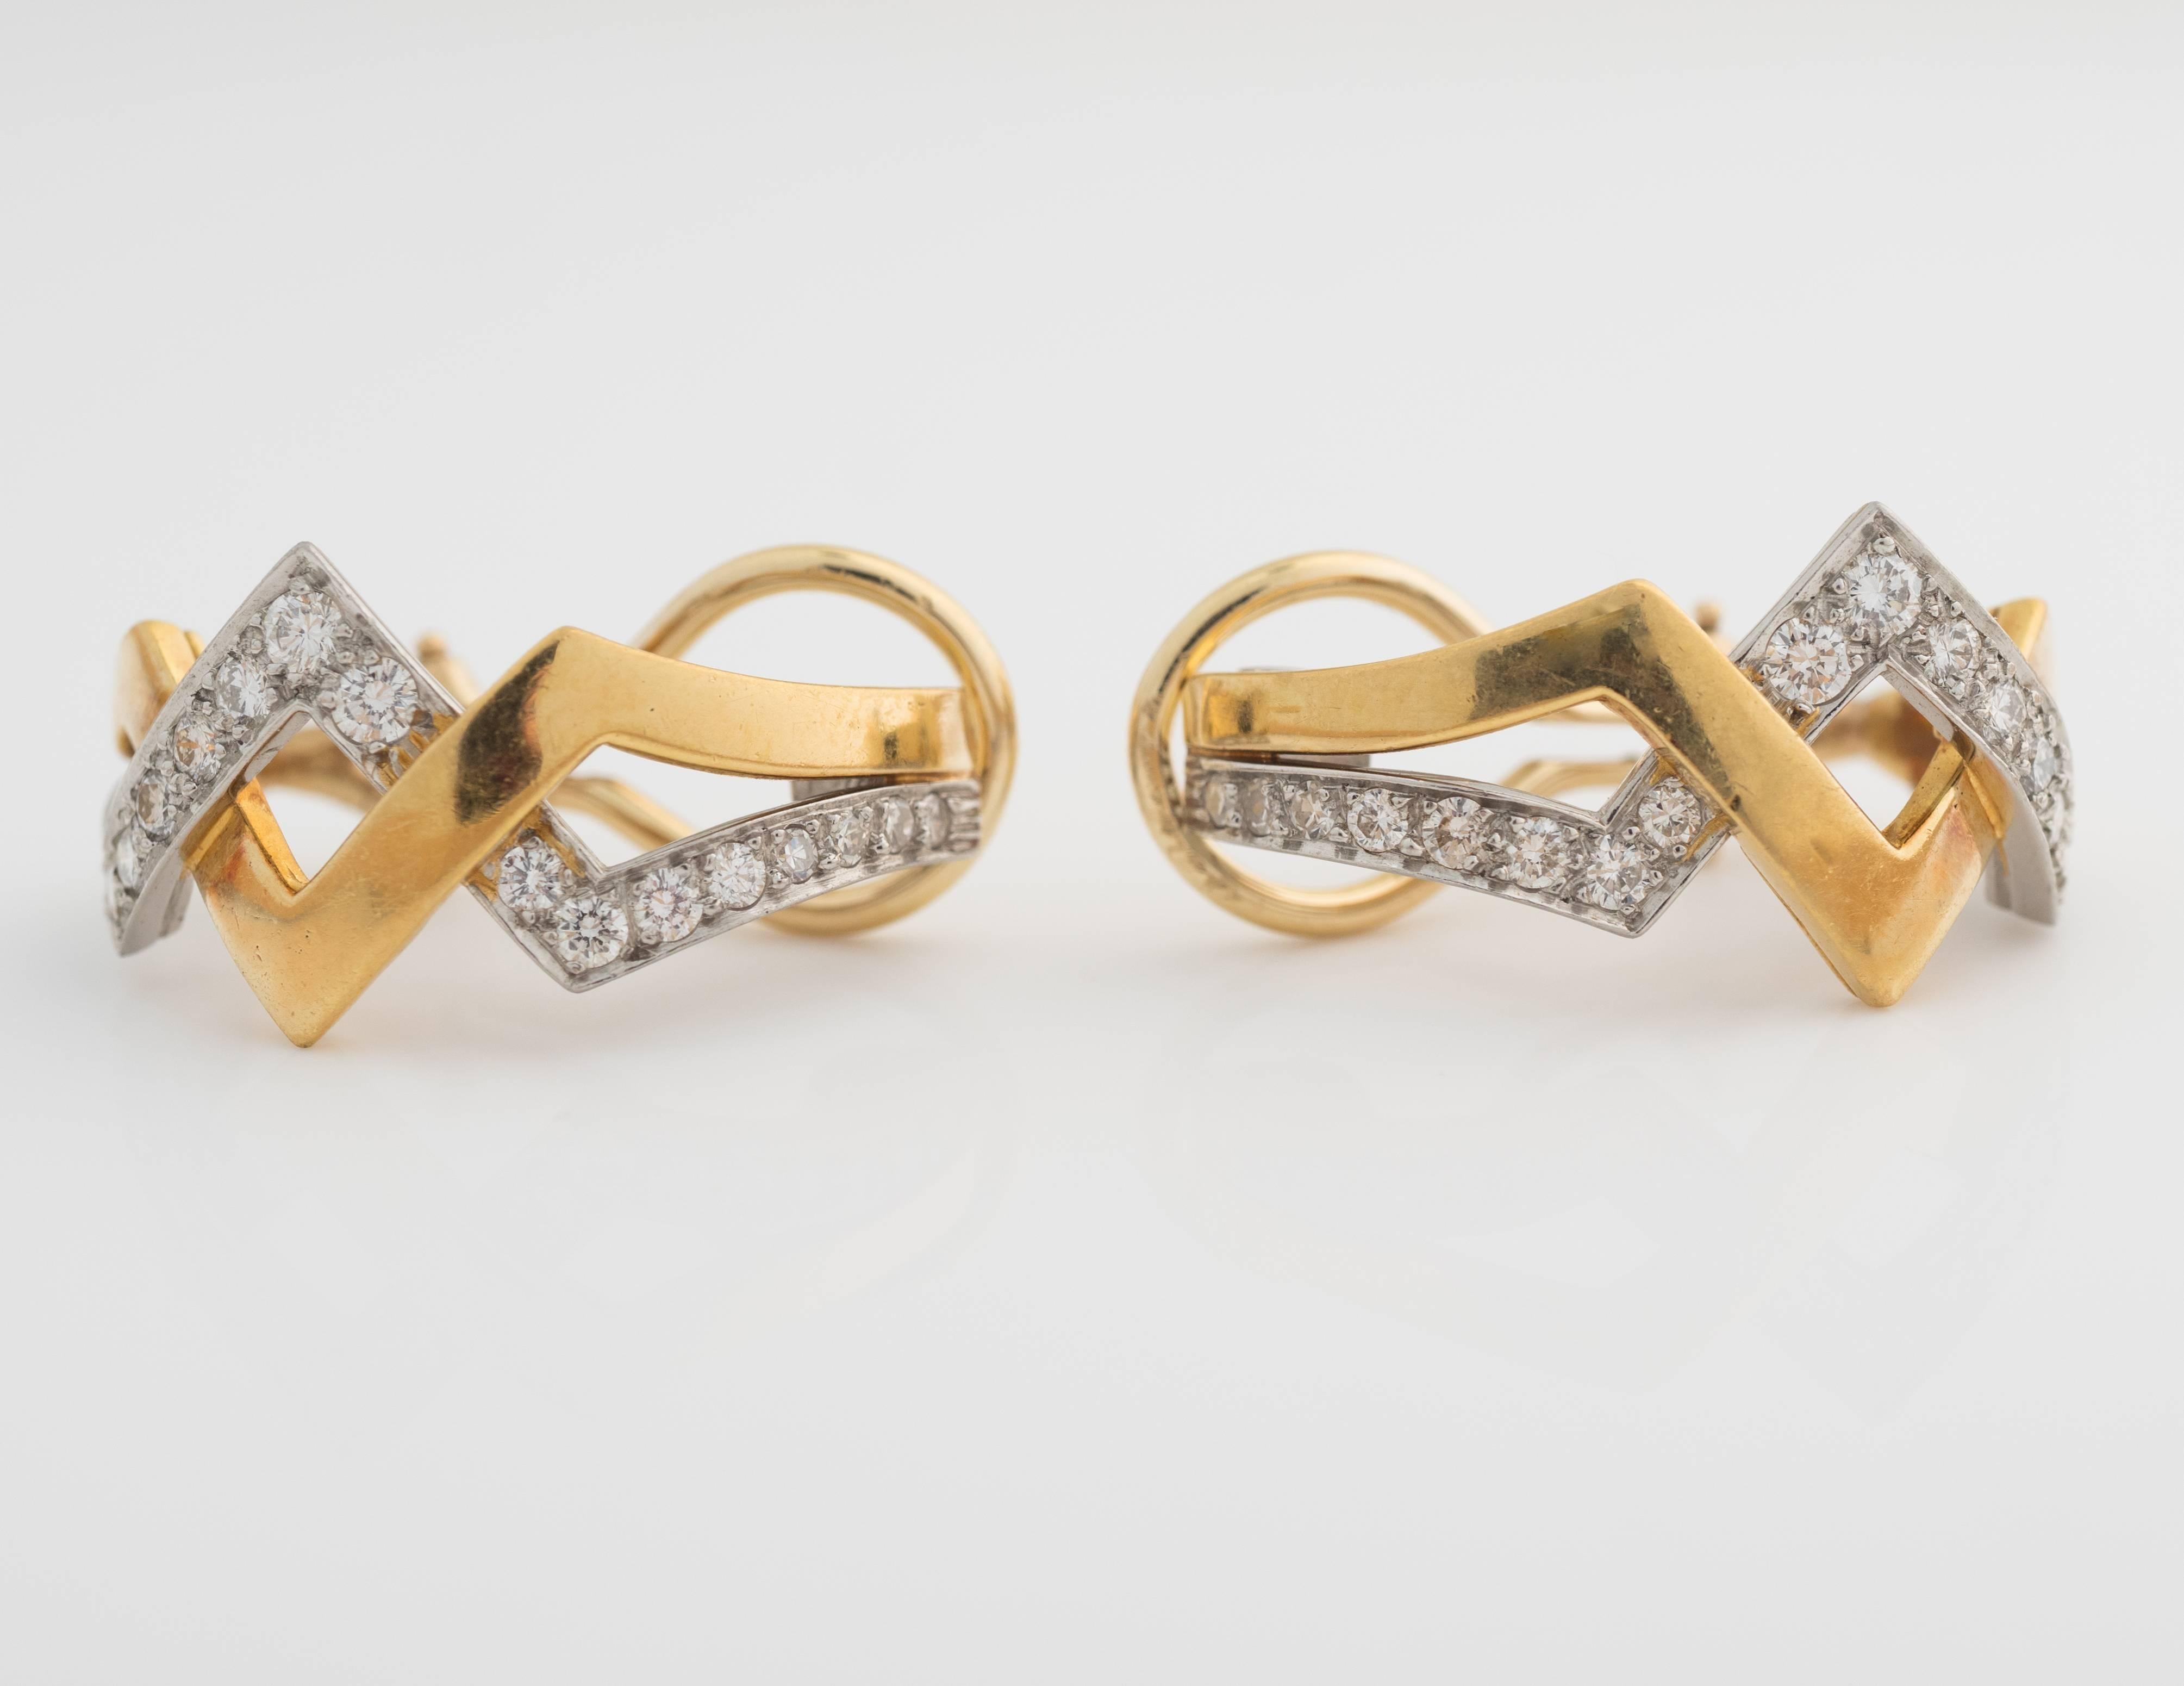 1960s Diamond Earrings crafted in 2-tone mixed metals, platinum and 18kt gold. These feature 1 carat total weight of diamonds boasting F color, VS clarity. The diamonds are set in platinum, intertwining in and out with 18kt yellow gold high polished